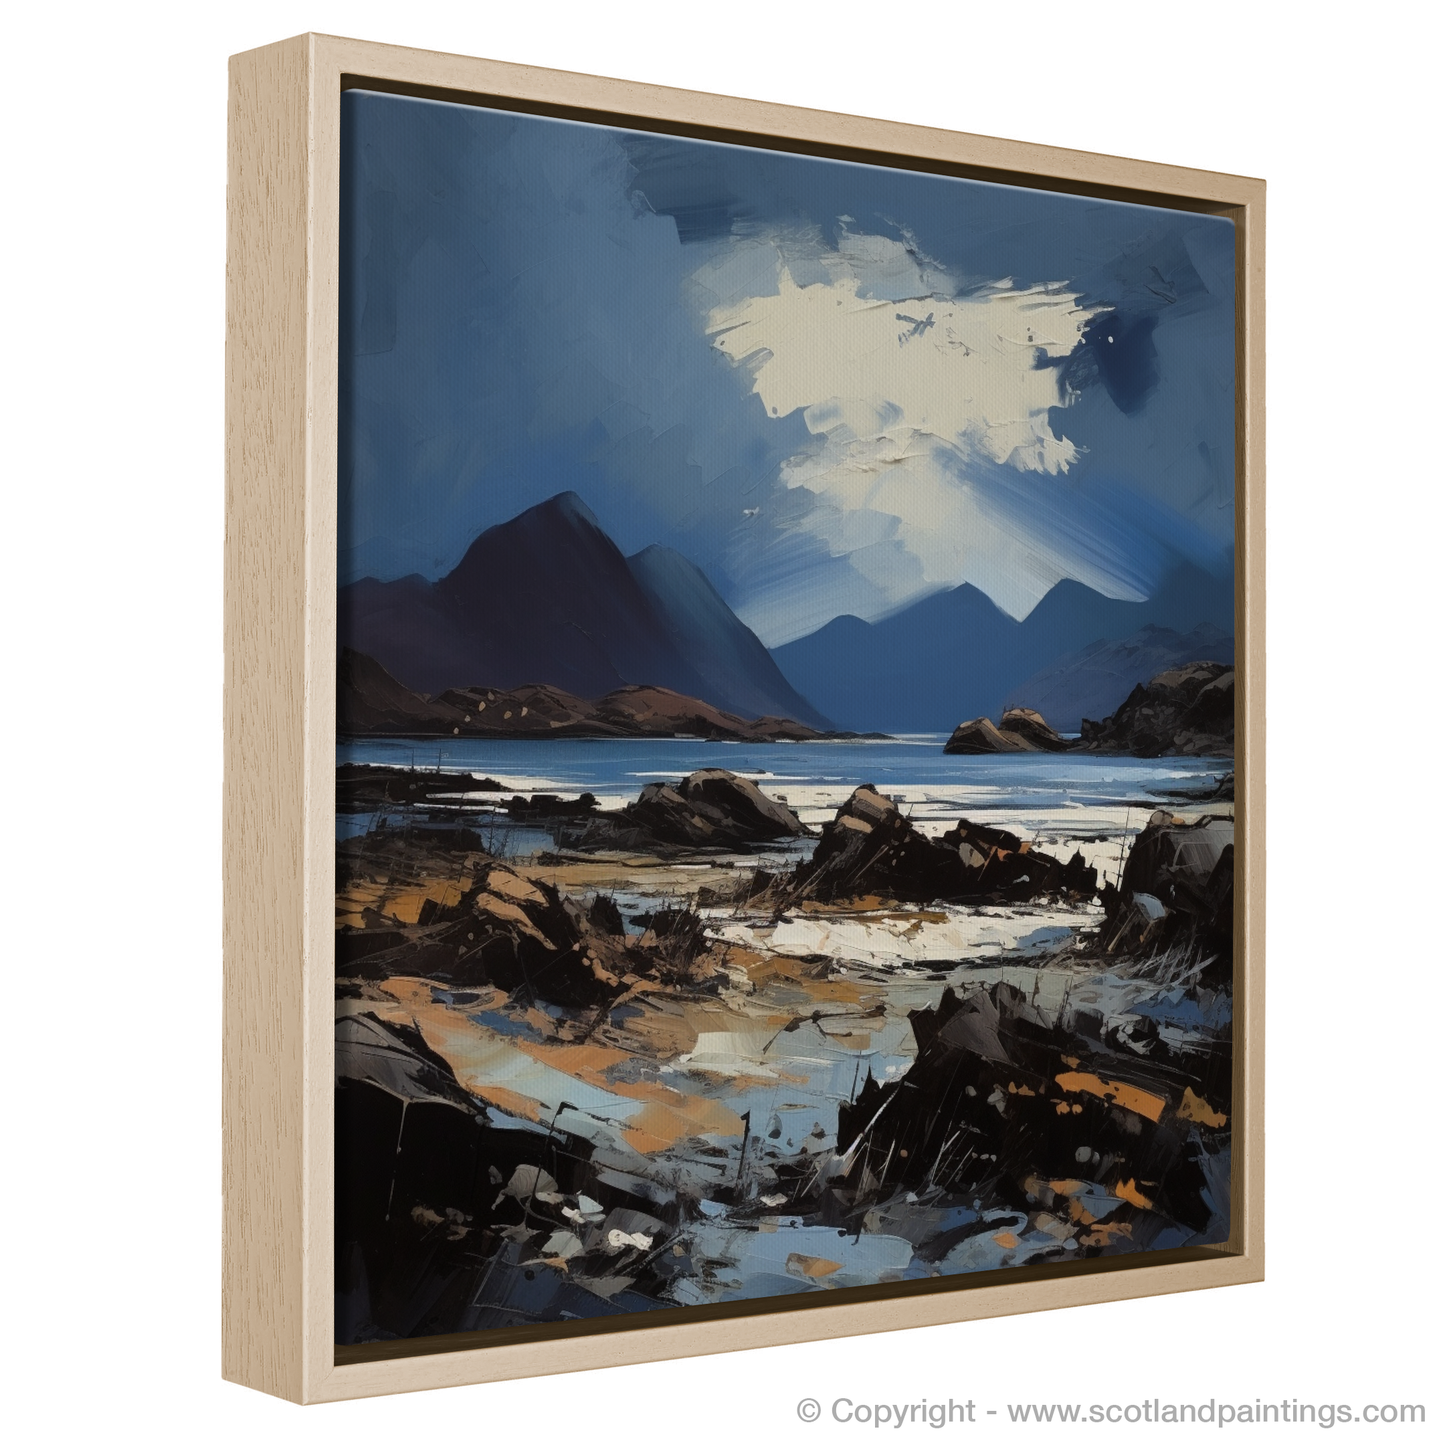 Painting and Art Print of Isle of Rum, Inner Hebrides entitled "Rum Reverie: An Expressionist Ode to Scottish Wilds".